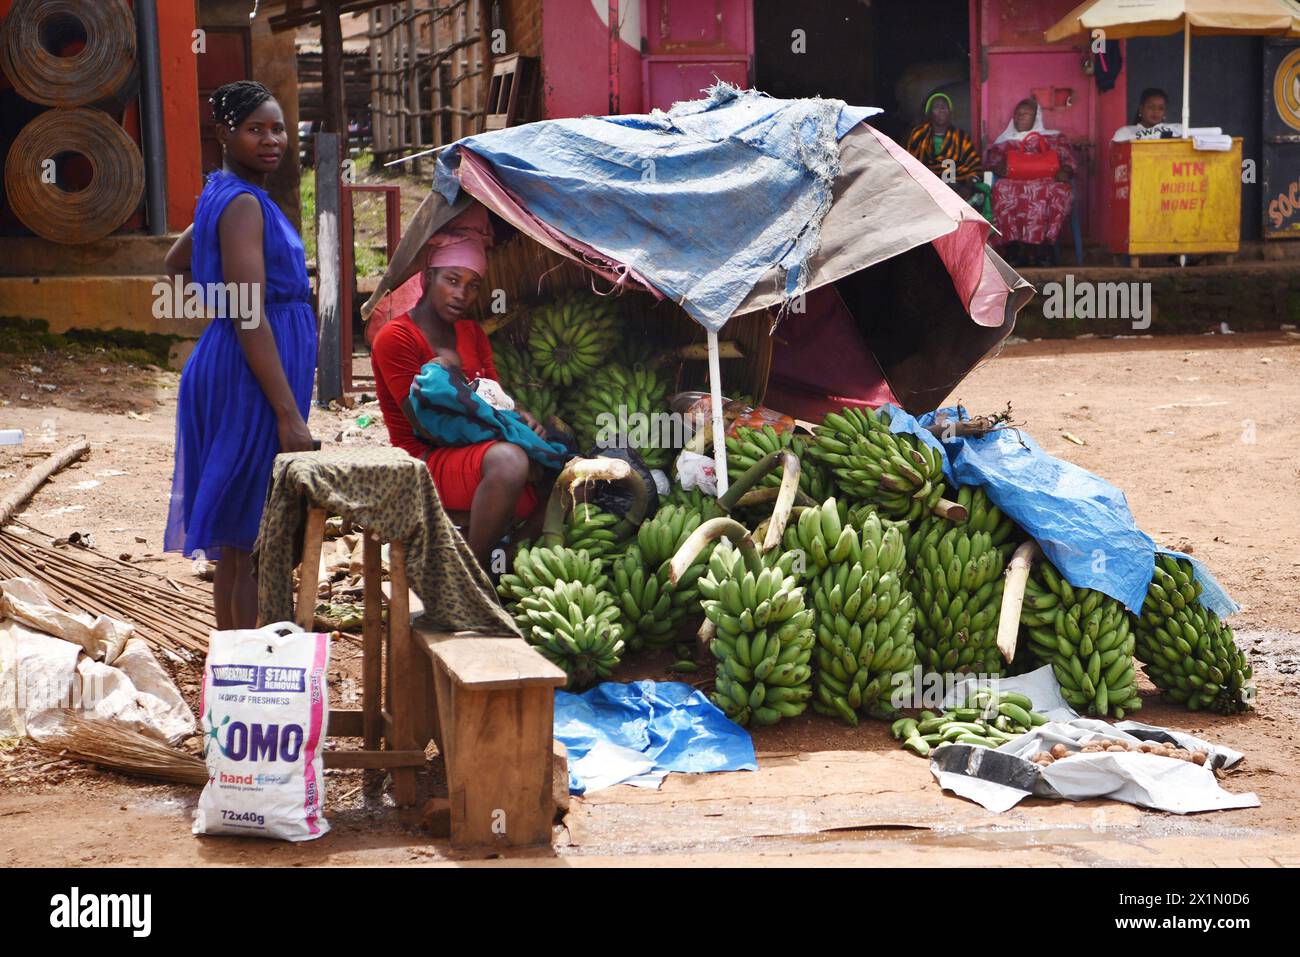 Two Ugandan women gracefully vend bananas at a roadside market stall, one tenderly balancing a baby in her arms, amid bustling market activity. Stock Photo